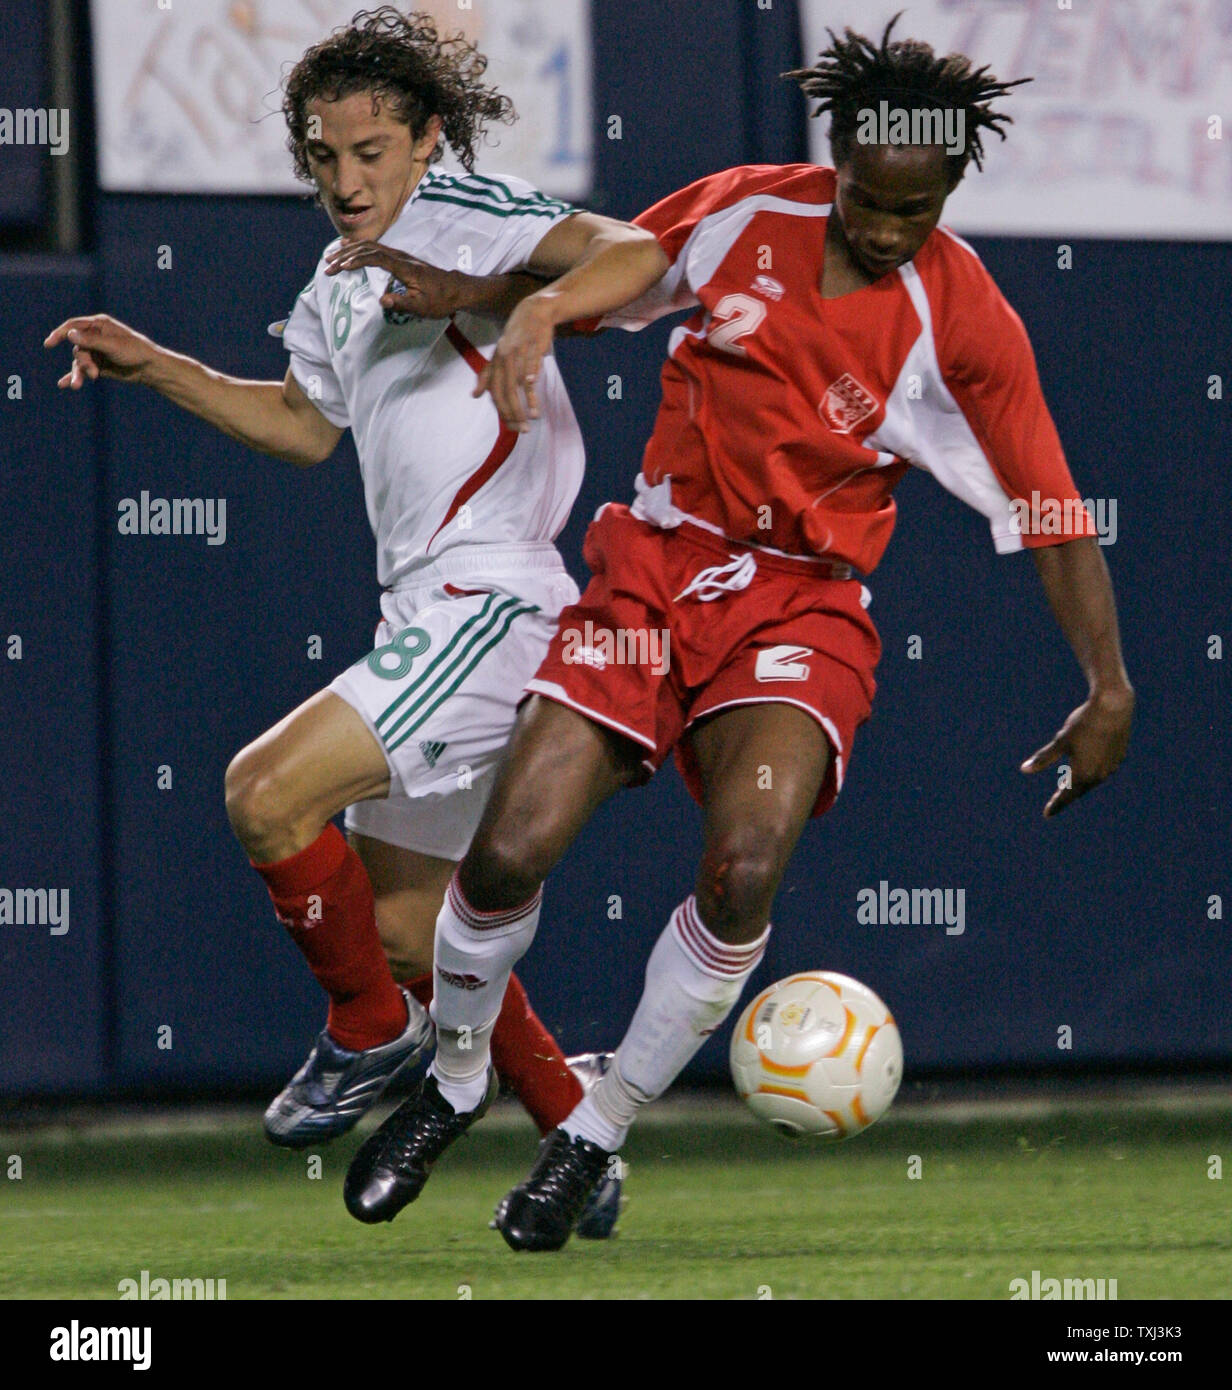 Mexico's Jose Andres Guardado (L) and Guadeloupe's Miguel Comminges (2) fight for the ball during the first half of the CONCACAF Gold Cup semifinal match at Soldier Field in Chicago on June 21, 2007. Mexico won 1-0. (UPI Photo/Brian Kersey) Stock Photo